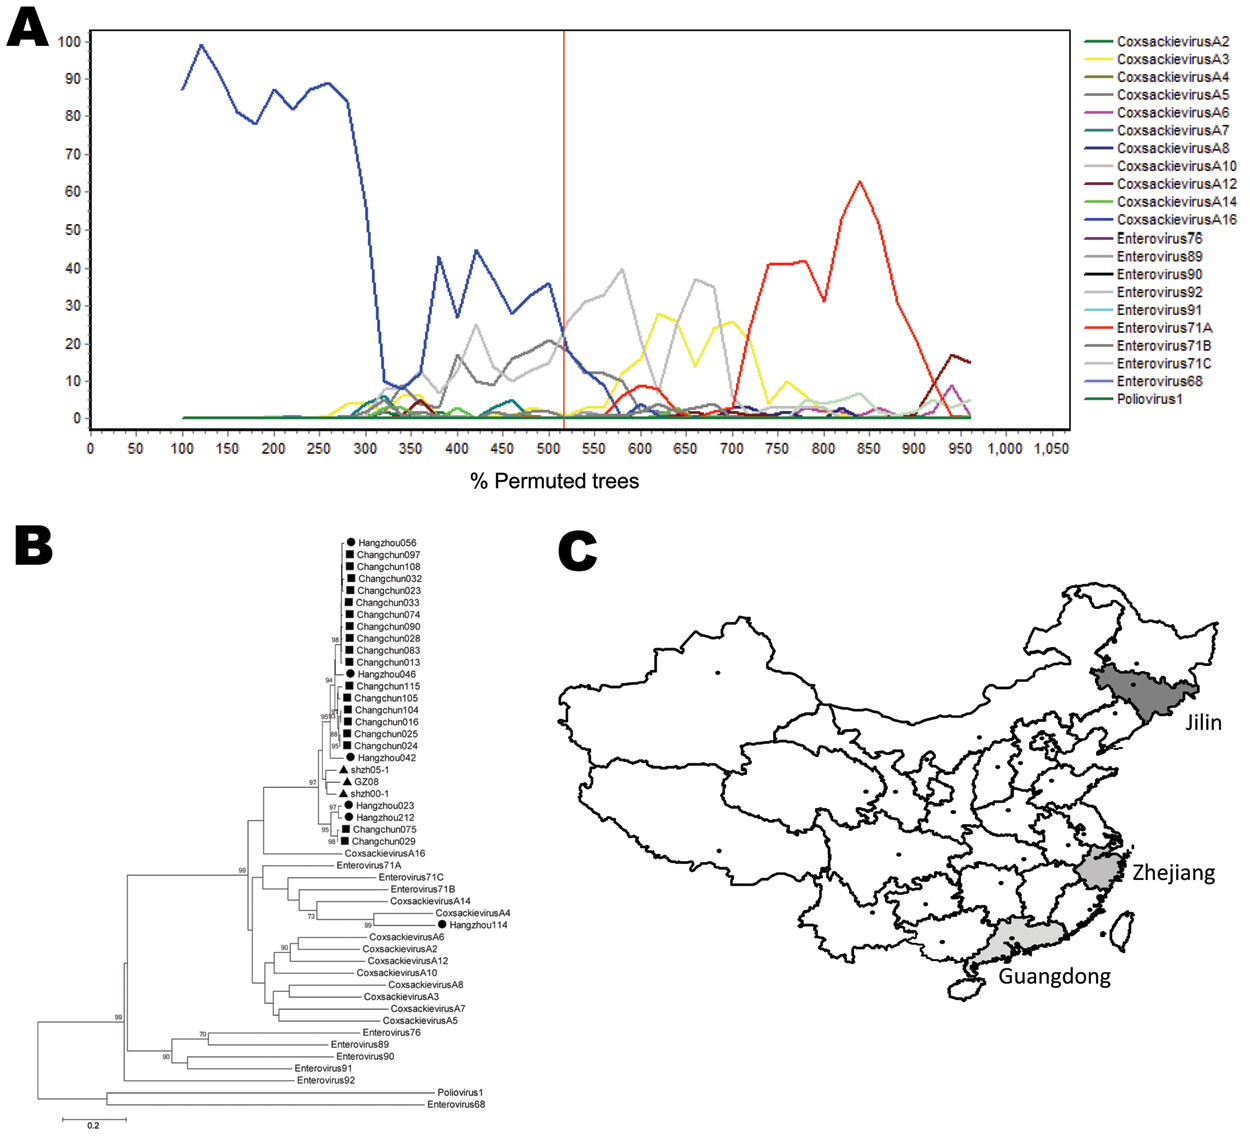 Phylogenetic analysis of Changchun and Hangzhou coxsackievirus 16A (CA16) sequences. A) Bootscanning results representing selected Changchun and Hangzhou sequences. changchun104 was shown for bootscanning analysis with human enterovirus A (HEV-A) sequences and shzh00-1 as references. The results suggested changchun104 was similar to shzh00-1. The red vertical line indicates position 3,555, which corresponded to shzh00-1. B) hangzhou212, hangzhou023, and all Changchun sequences clustered with shz